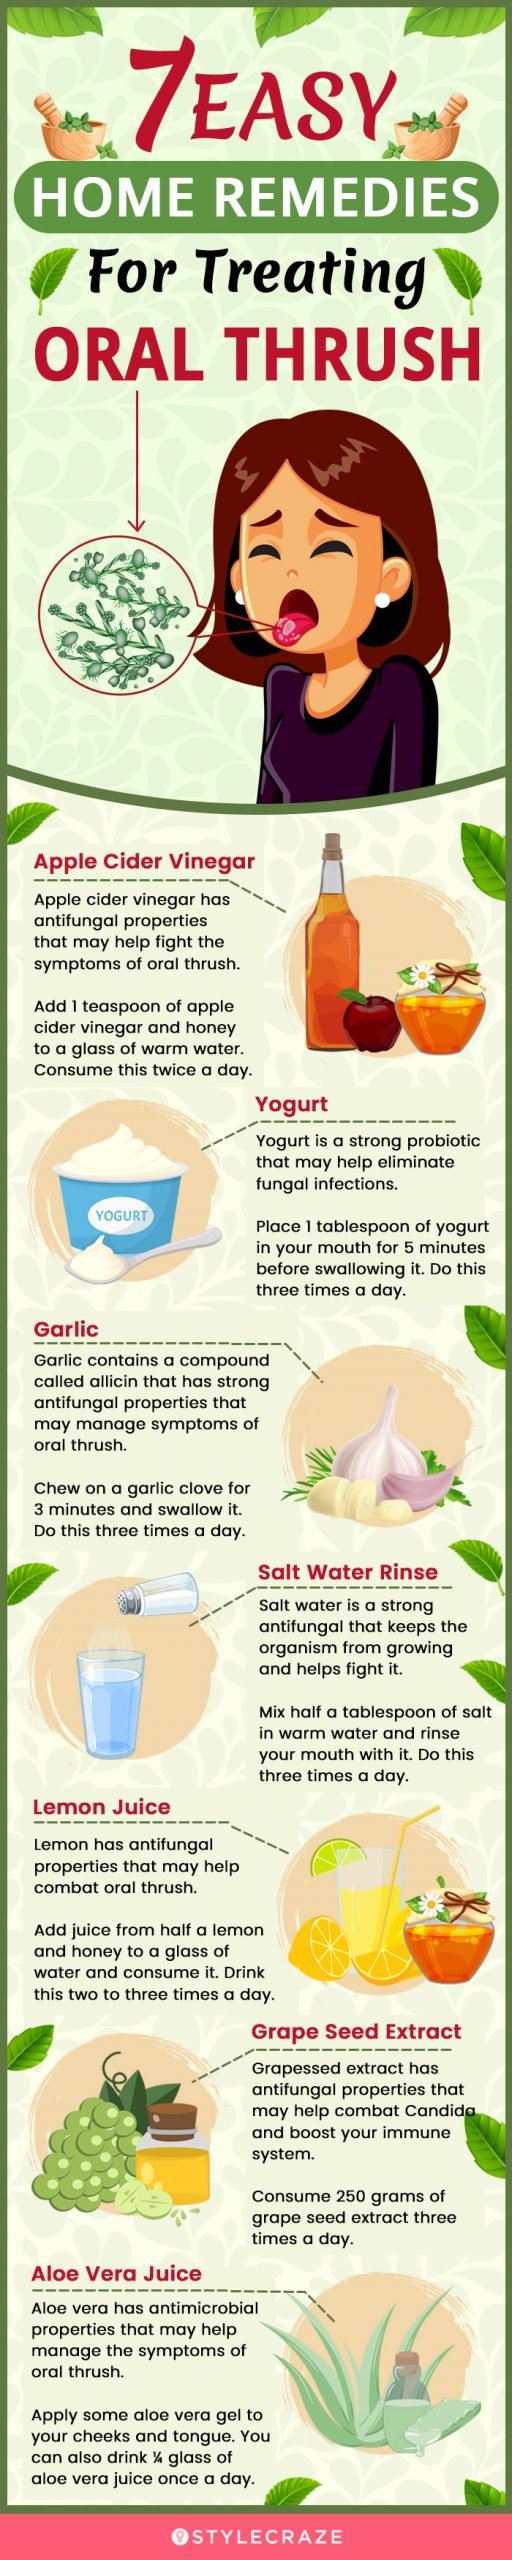 7 easy home remedies for treating oral thrush (infographic)